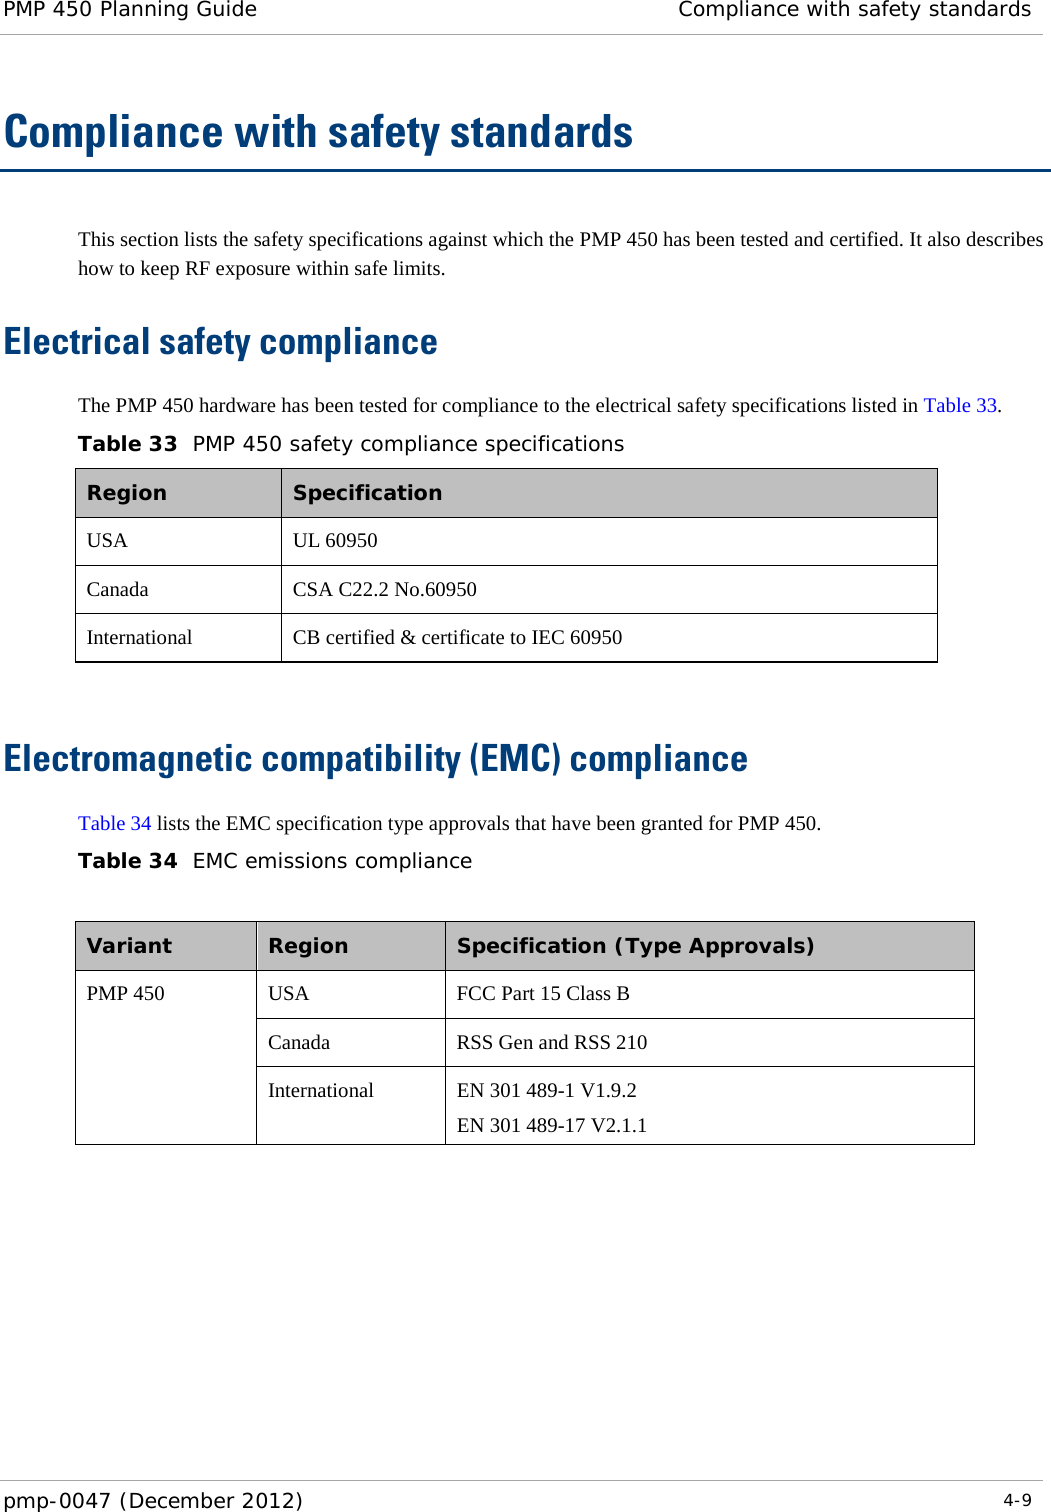 PMP 450 Planning Guide Compliance with safety standards  pmp-0047 (December 2012)  4-9  Compliance with safety standards This section lists the safety specifications against which the PMP 450 has been tested and certified. It also describes how to keep RF exposure within safe limits. Electrical safety compliance  The PMP 450 hardware has been tested for compliance to the electrical safety specifications listed in Table 33. Table 33  PMP 450 safety compliance specifications Region  Specification USA UL 60950 Canada CSA C22.2 No.60950 International CB certified &amp; certificate to IEC 60950  Electromagnetic compatibility (EMC) compliance Table 34 lists the EMC specification type approvals that have been granted for PMP 450. Table 34  EMC emissions compliance  Variant  Region  Specification (Type Approvals) PMP 450 USA FCC Part 15 Class B Canada RSS Gen and RSS 210 International EN 301 489-1 V1.9.2 EN 301 489-17 V2.1.1   